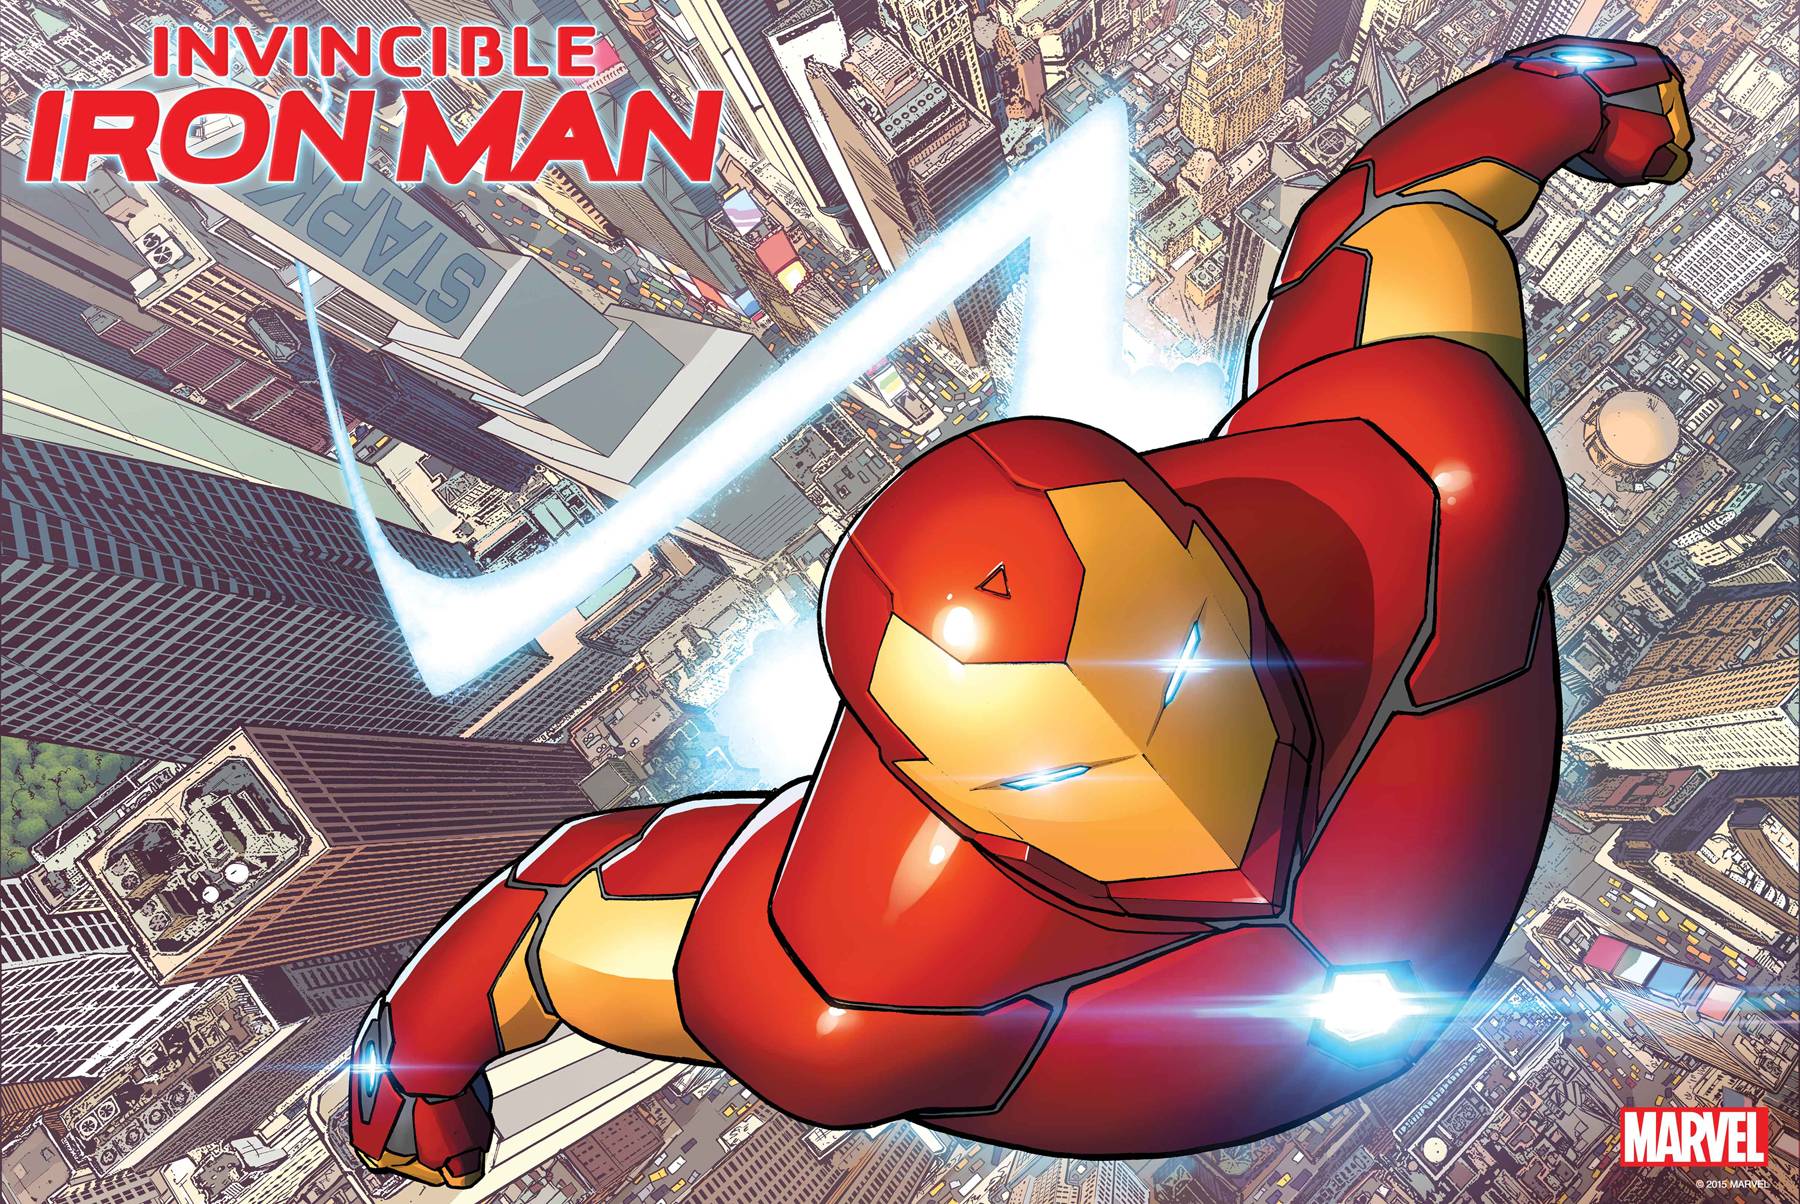 INVINCIBLE IRON MAN #1 BY MARQUEZ POSTER